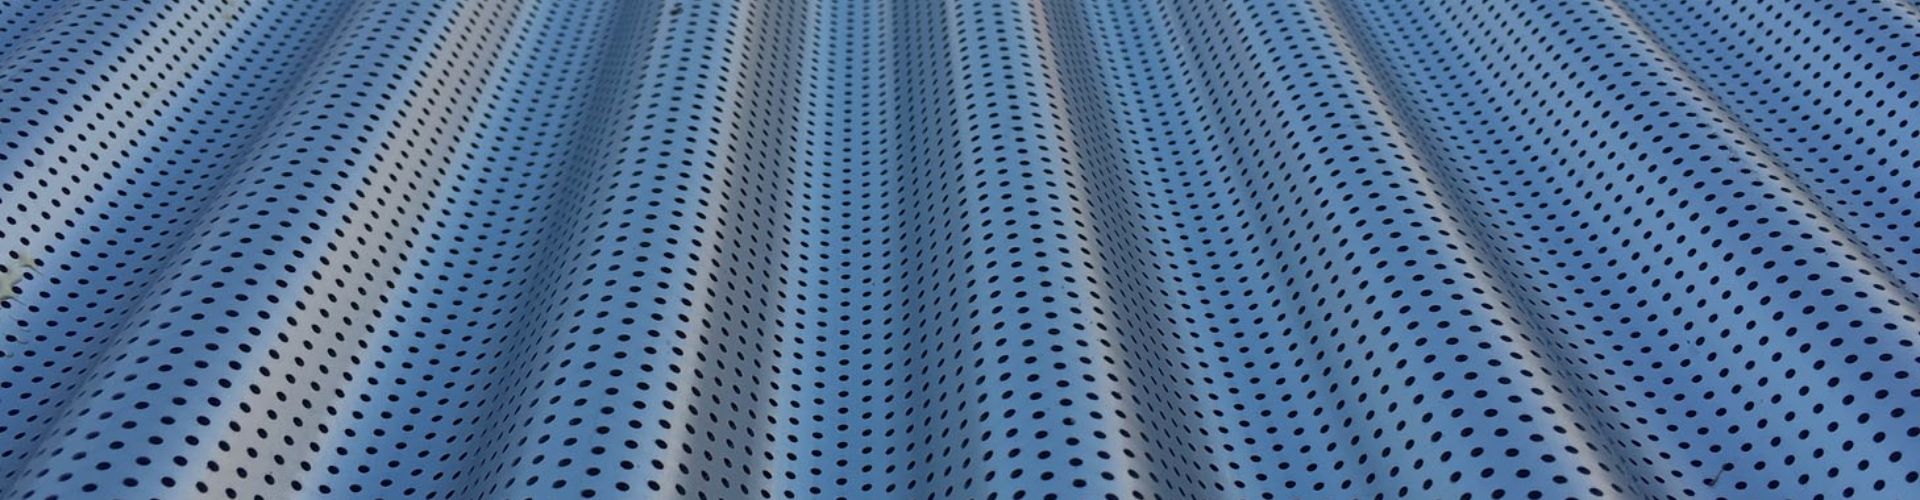 Perforated Roofing Sheet